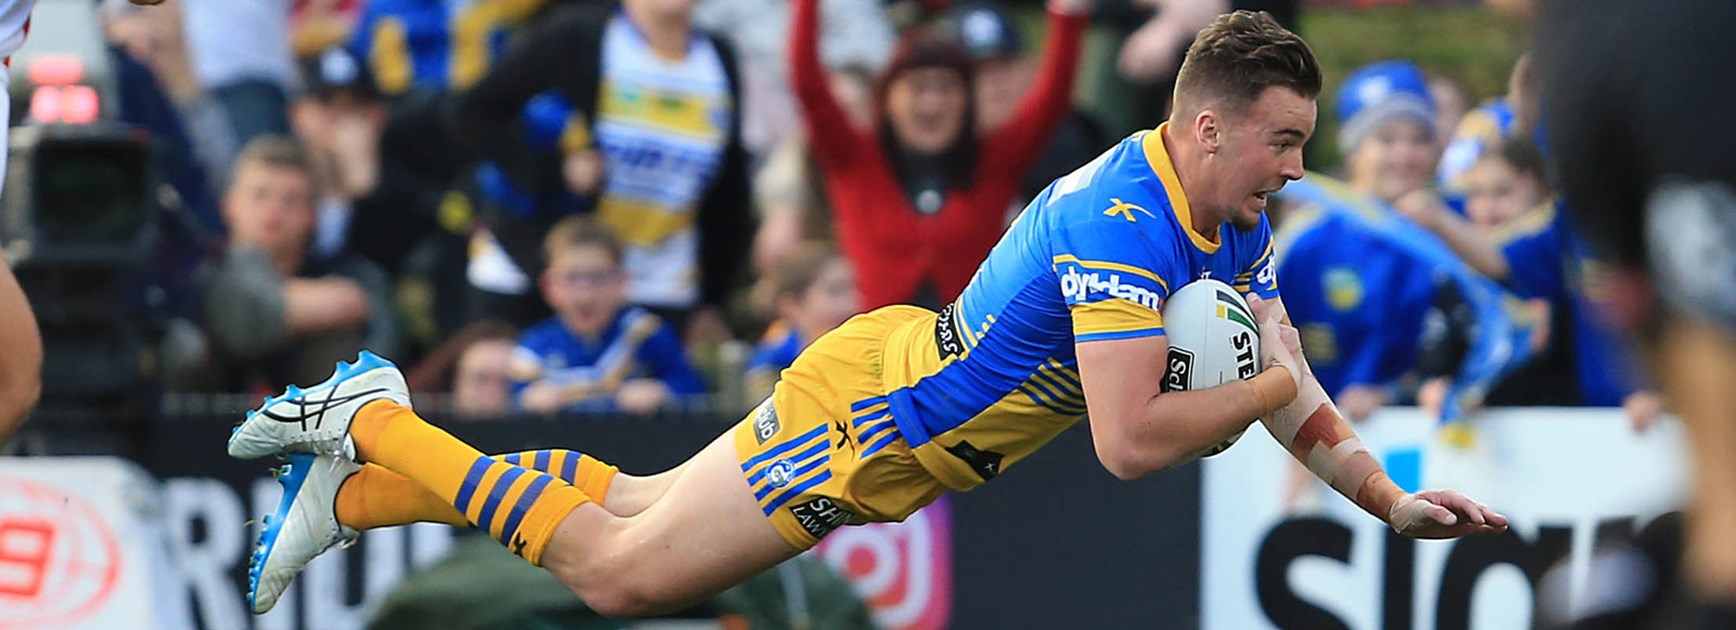 Eels utility Clint Gutherson scored a try against the Panthers in Round 19.